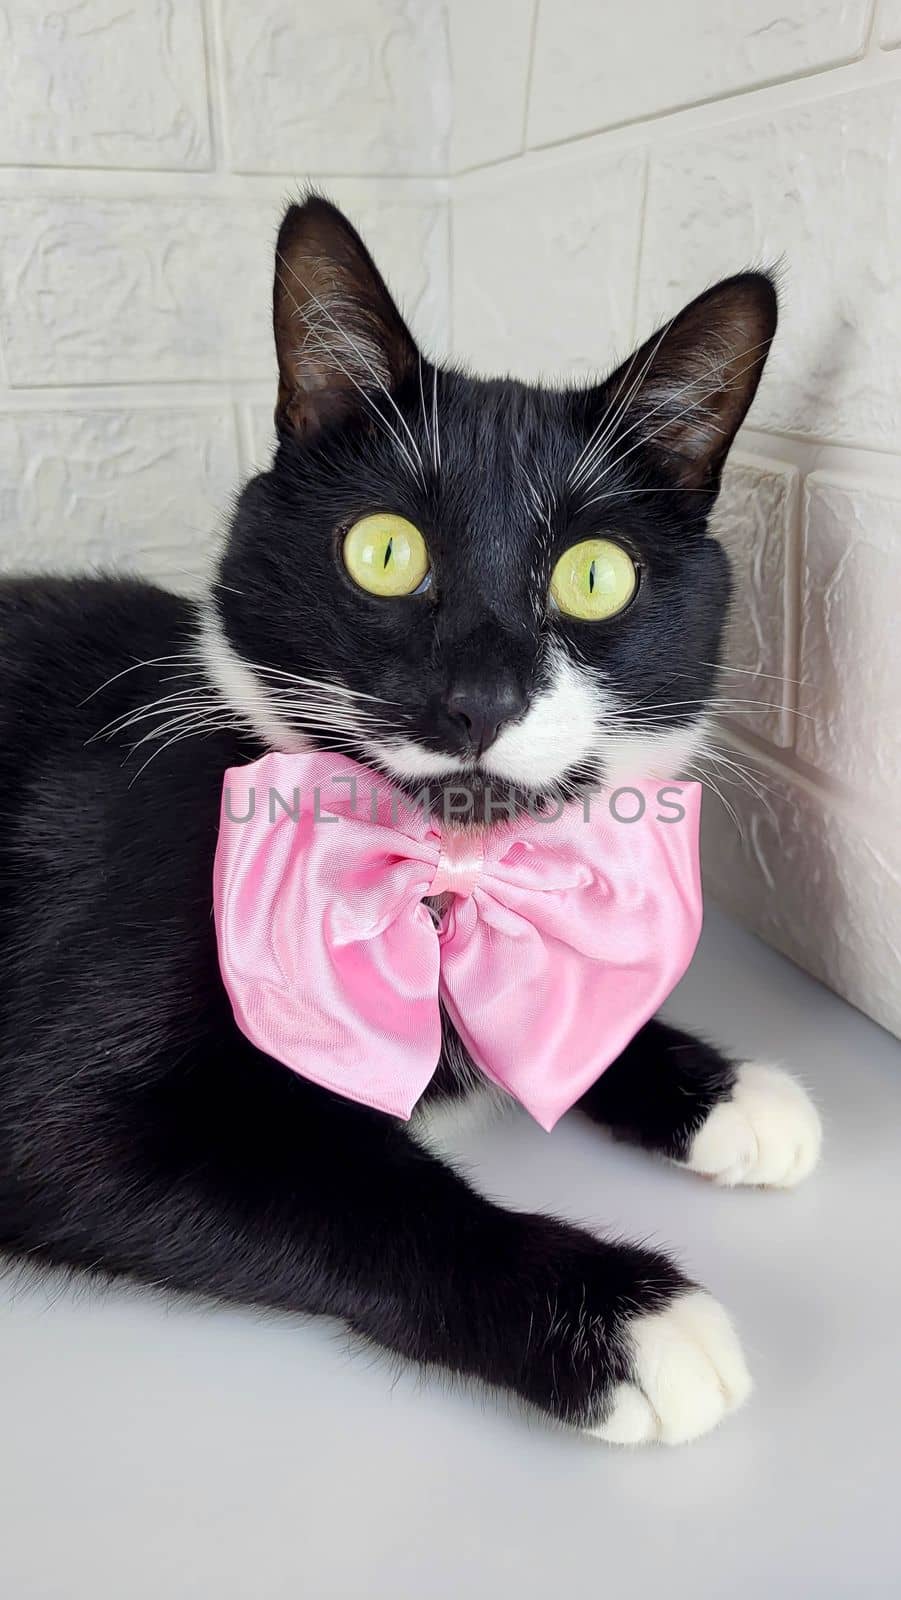 Funny black cat with a pink bow looks attentively at the camera.